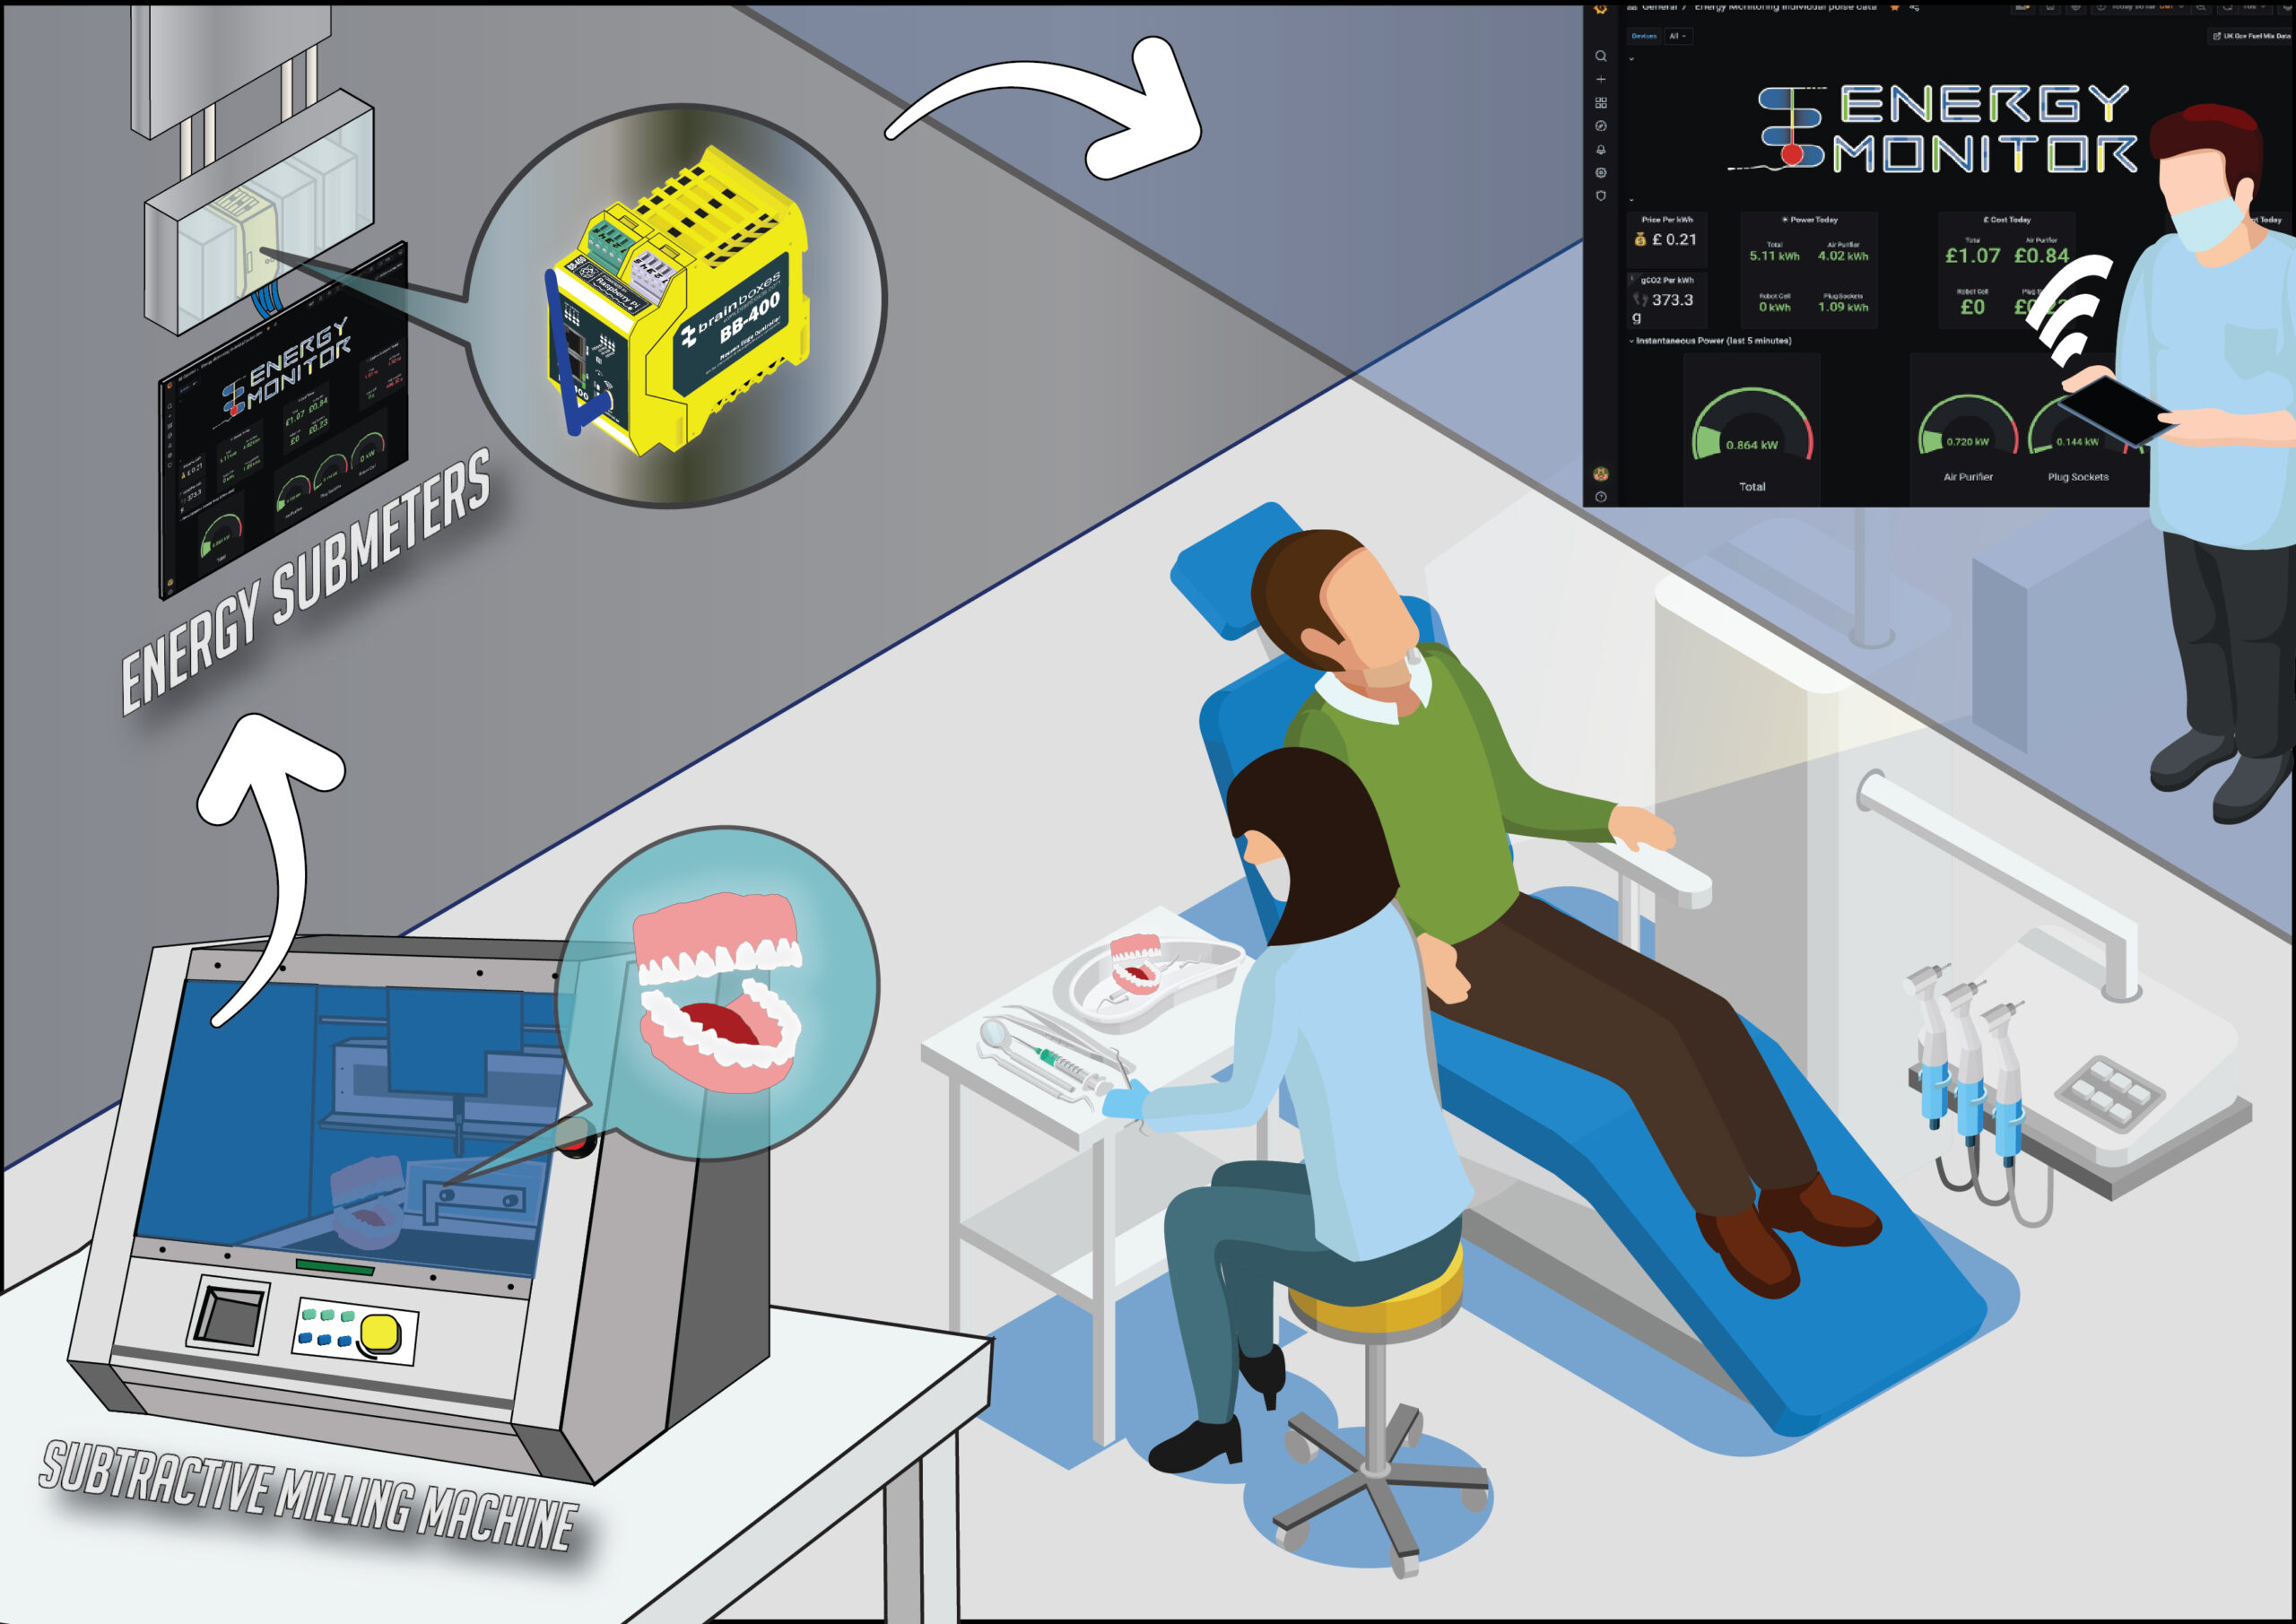 Featured image for “Sustaining Smiles with Smart Energy Monitoring”